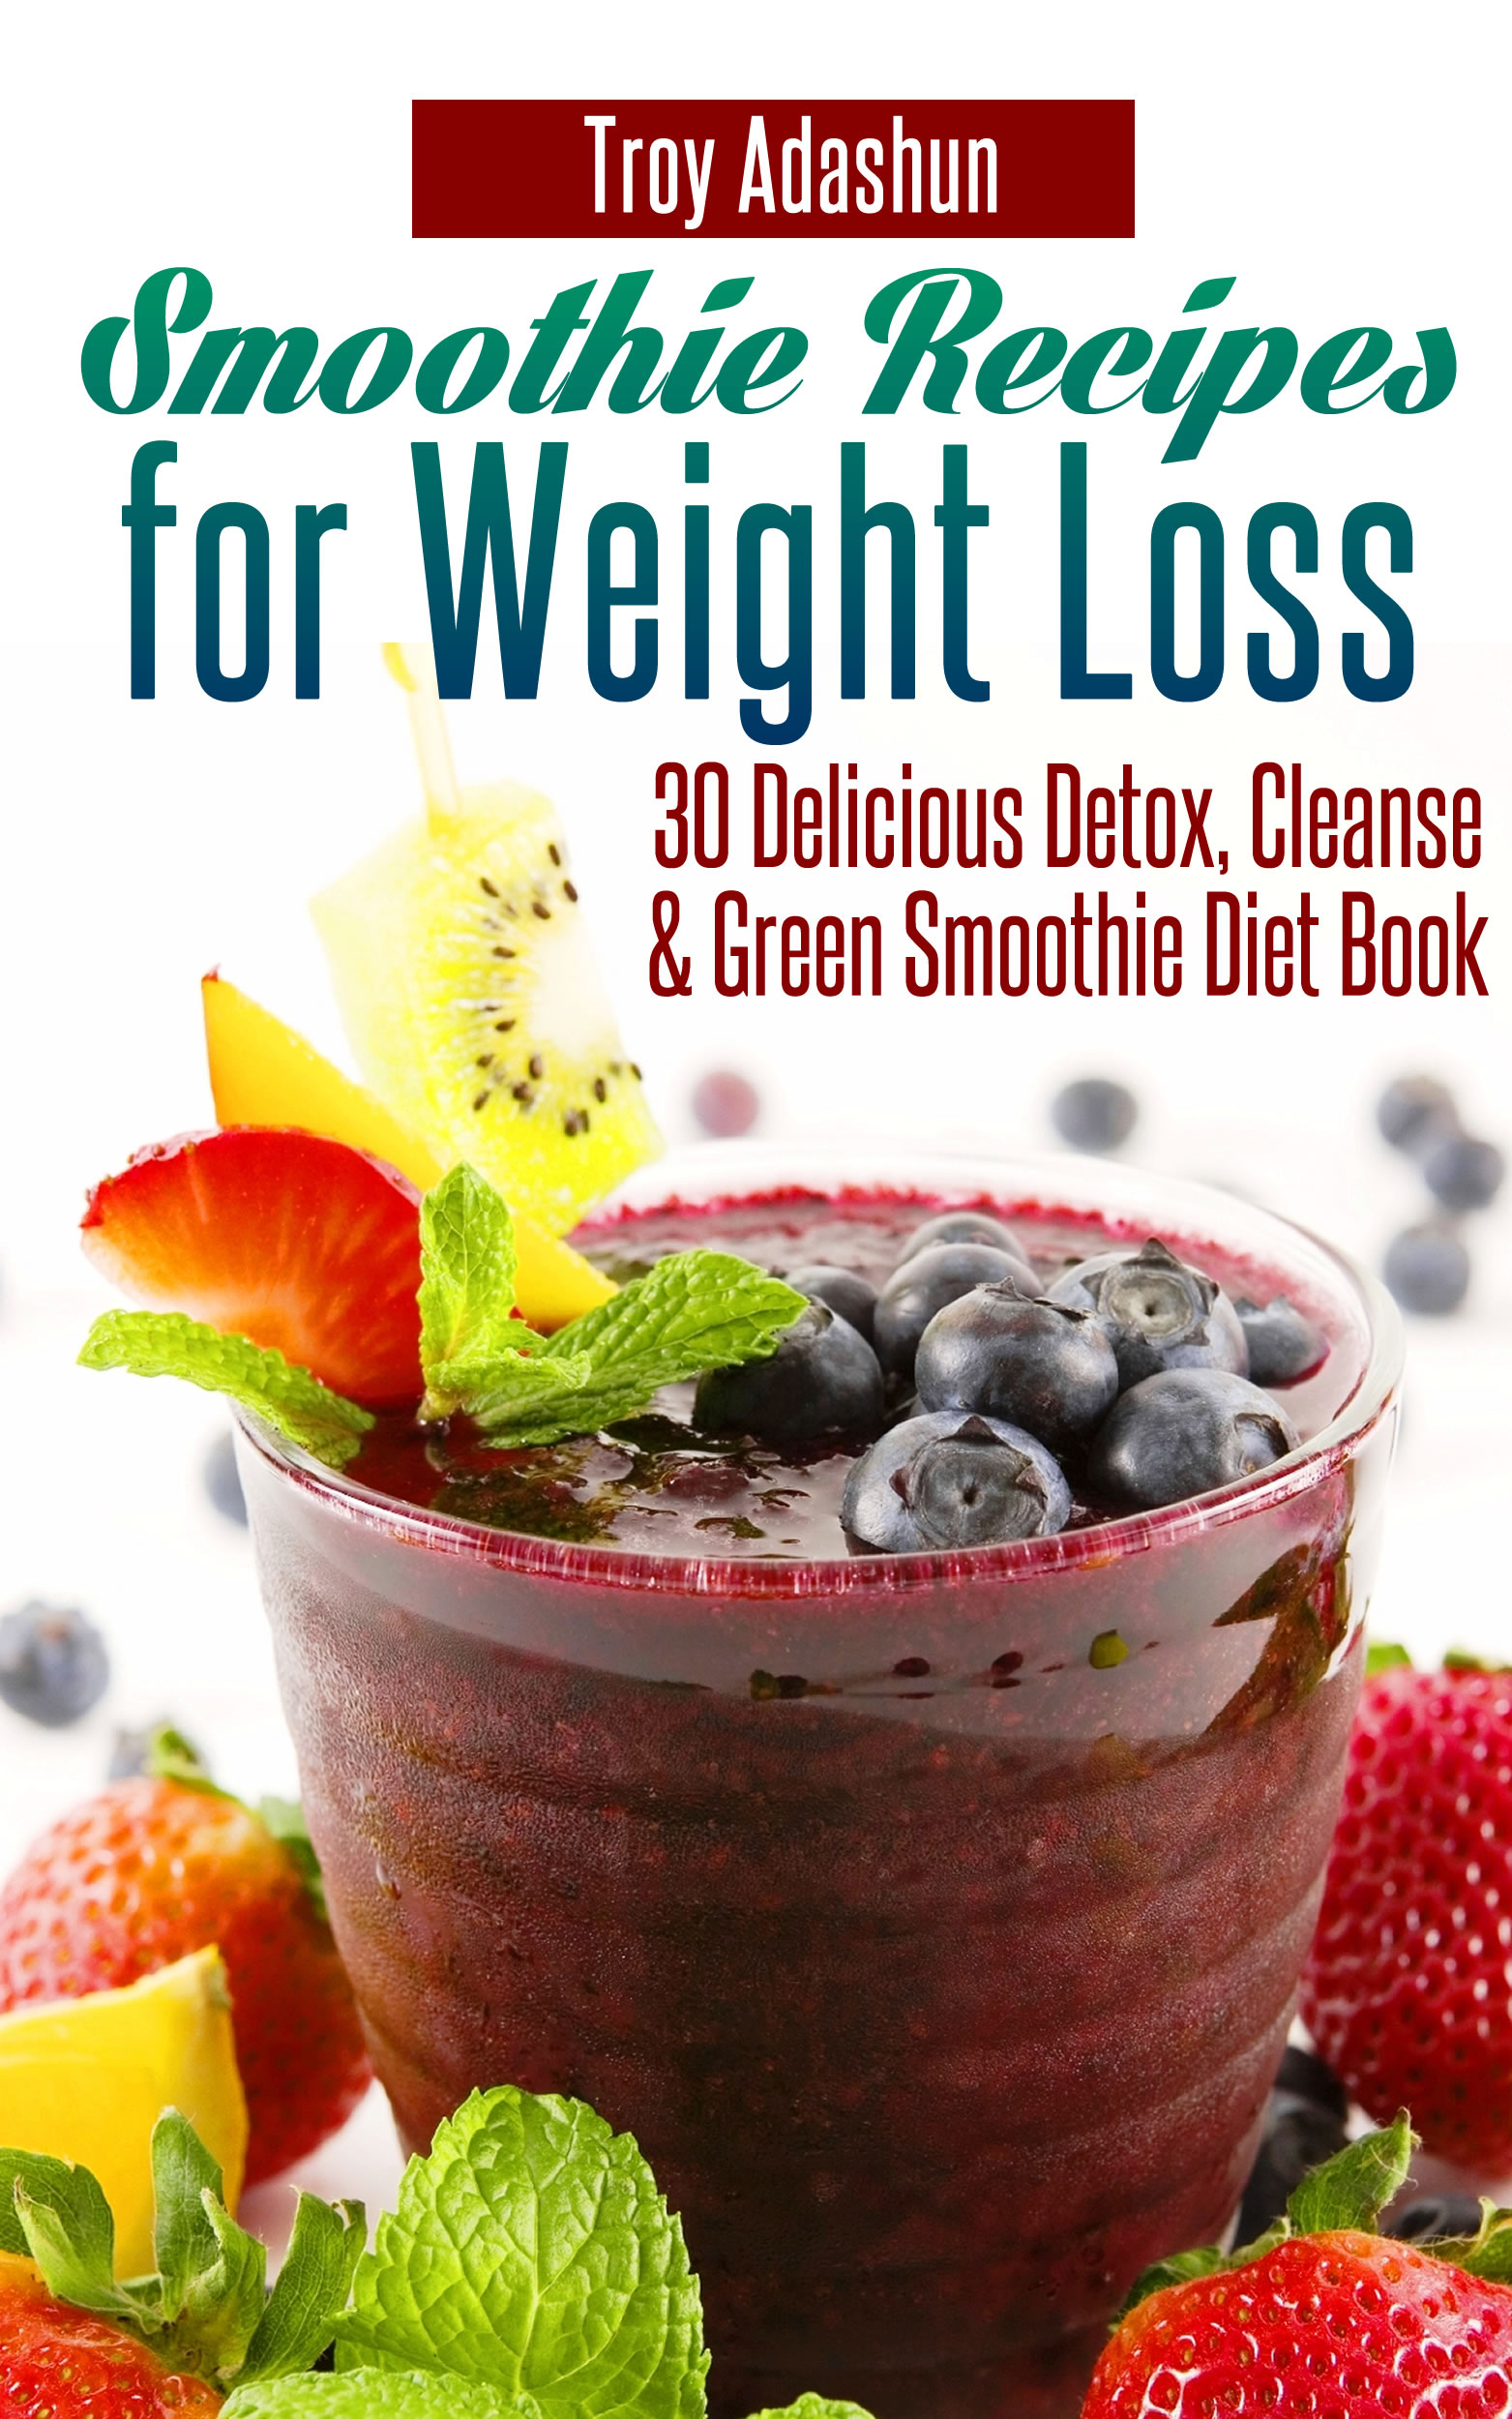 Smashwords – Smoothie Recipes for Weight Loss - 30 Delicious Detox ...